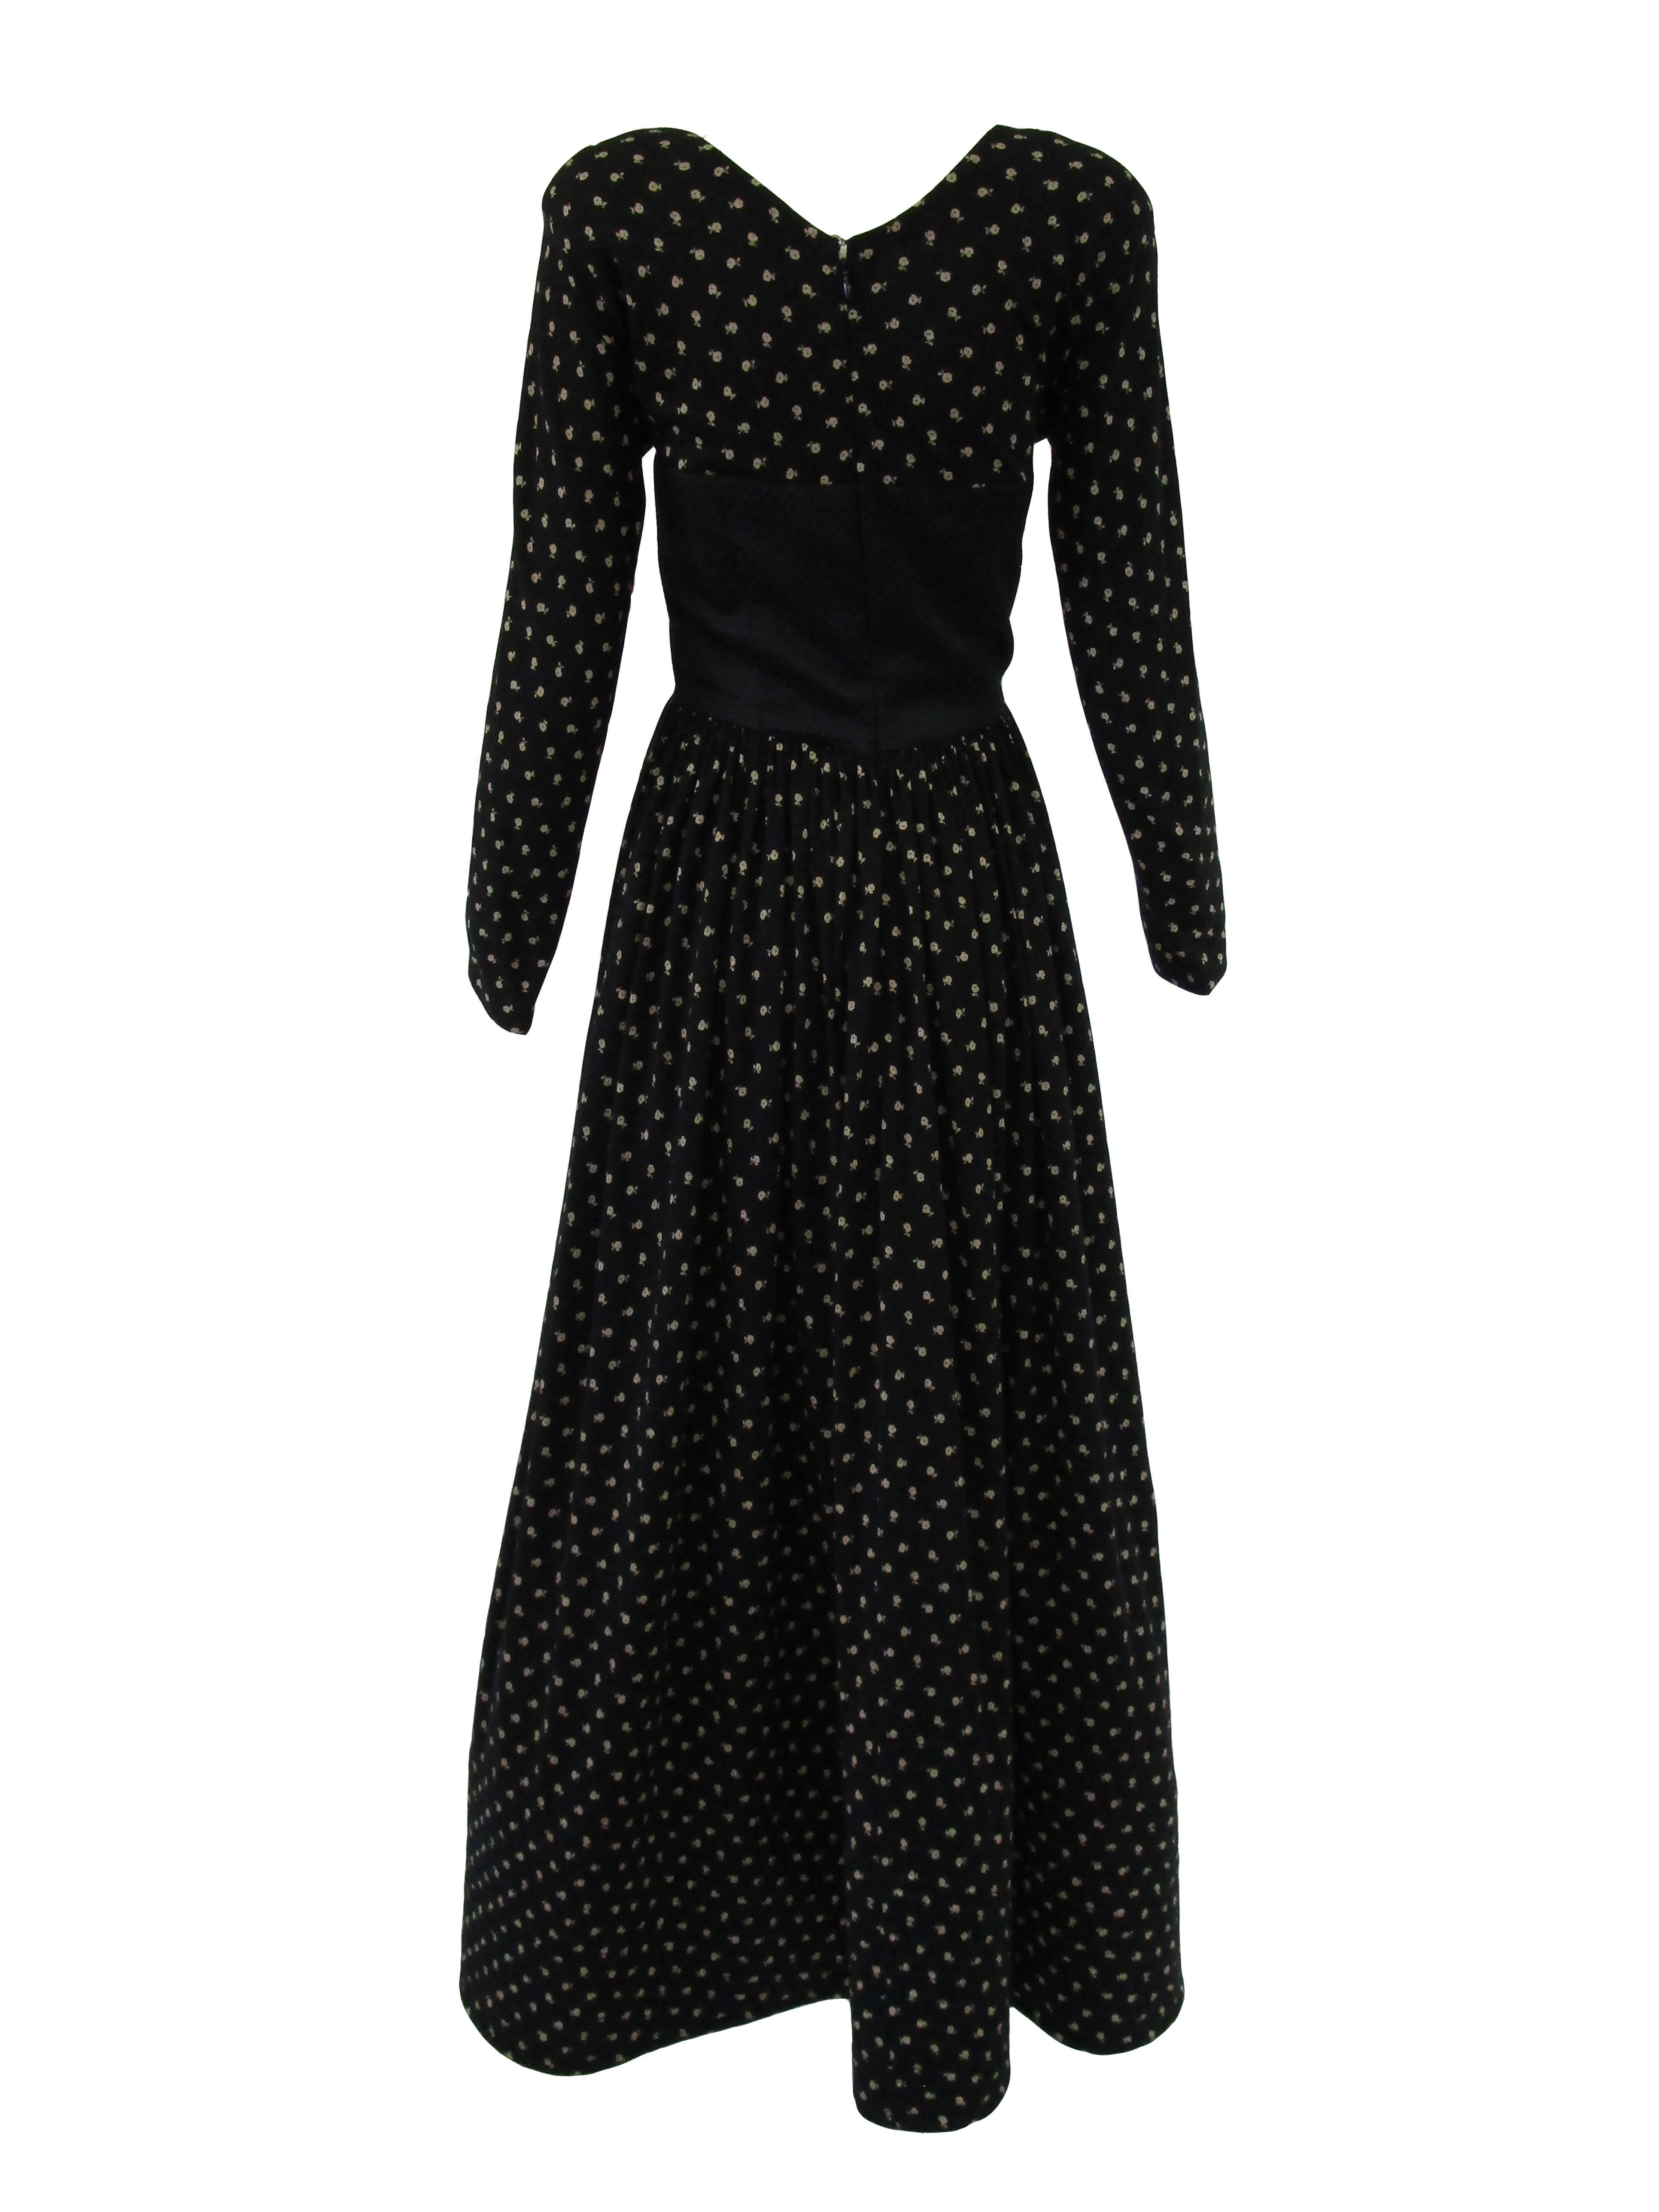 
Designer ensemble from Geoffrey Beene featuring a long wool knit printed dress with floral motifs & silk matelasse bodice. The beautifully quilted bolero has faux front pockets and star buttons and is lined in printed silk. The eight inch hem is